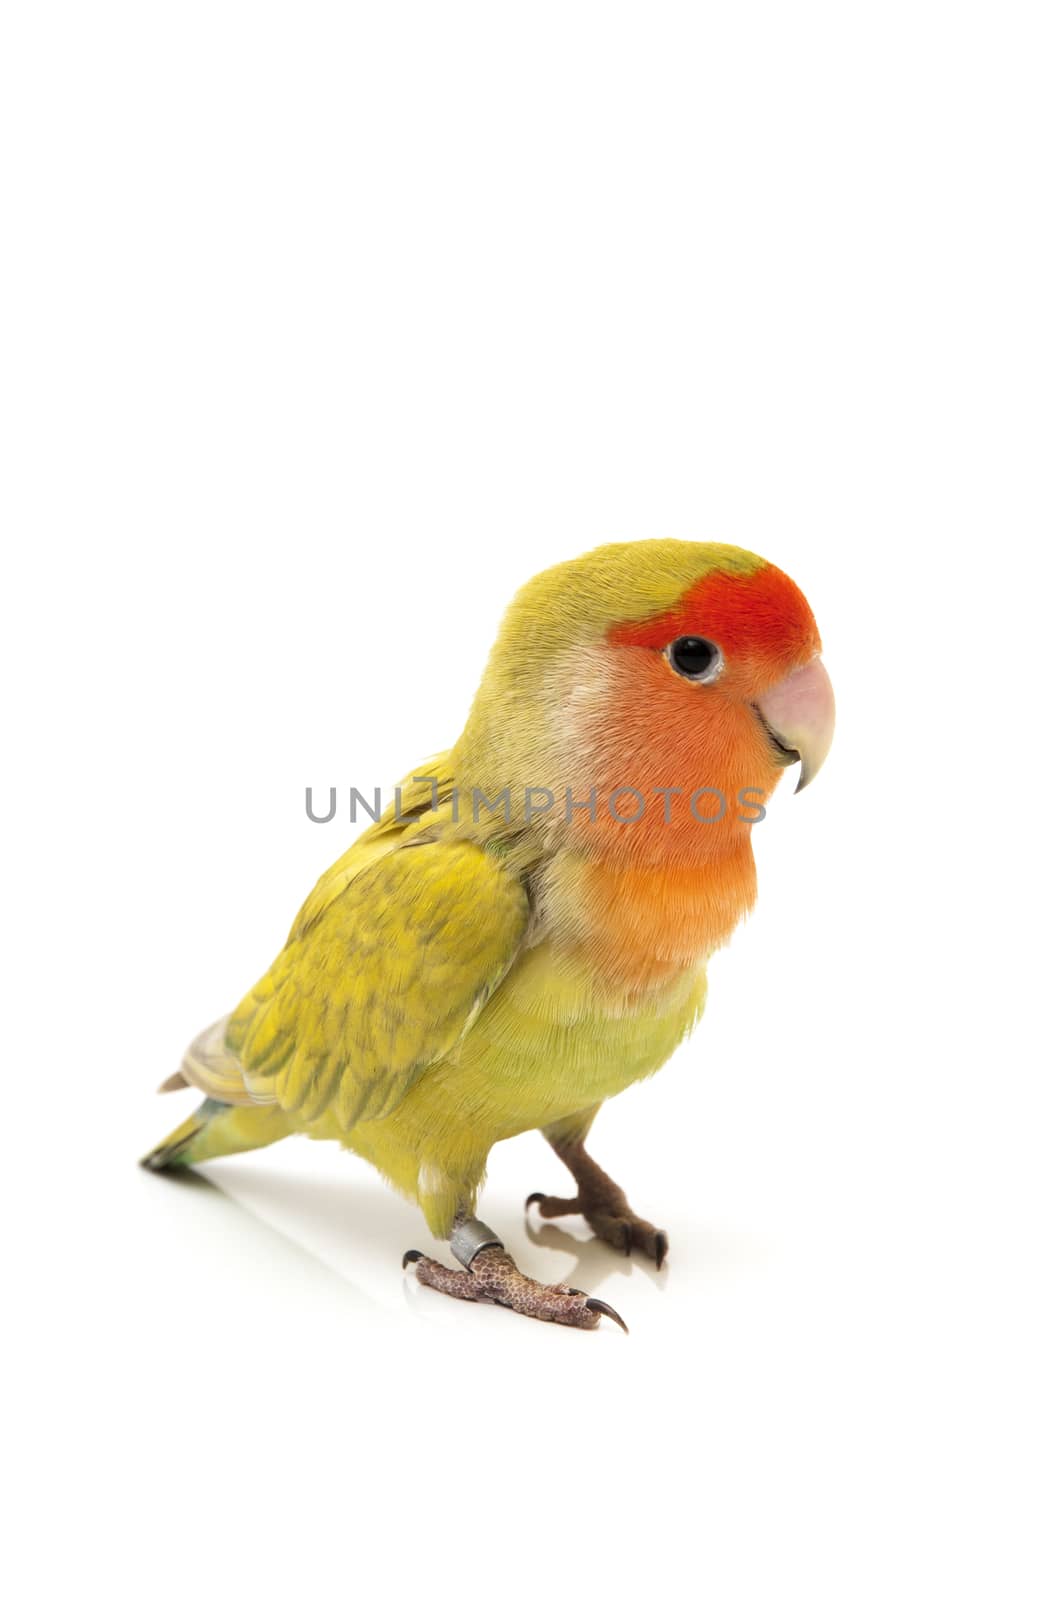 Lovebird colors on a white background